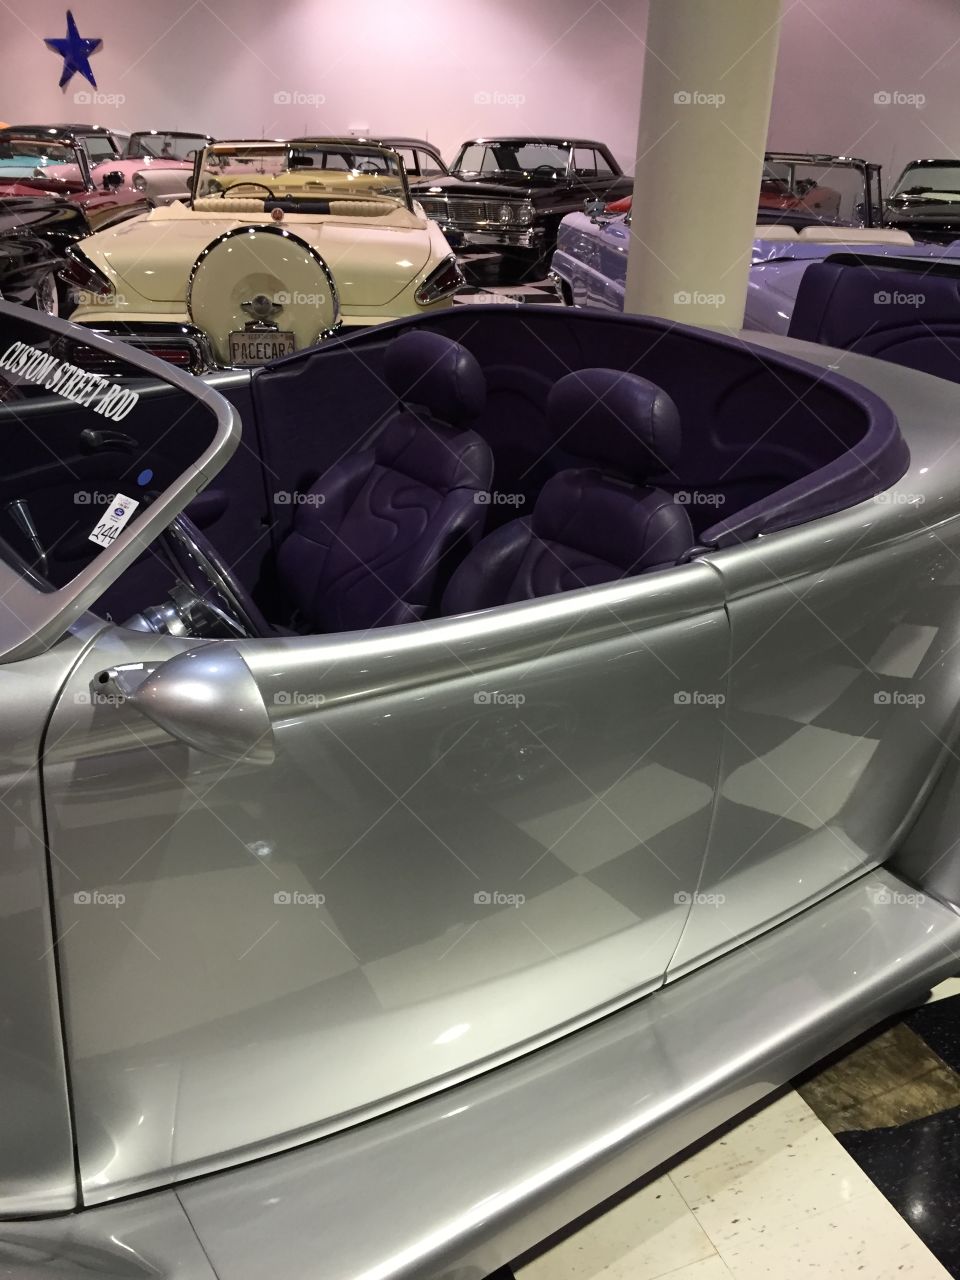 Classic Hot Rod With Interior Redone In Purple Leather!